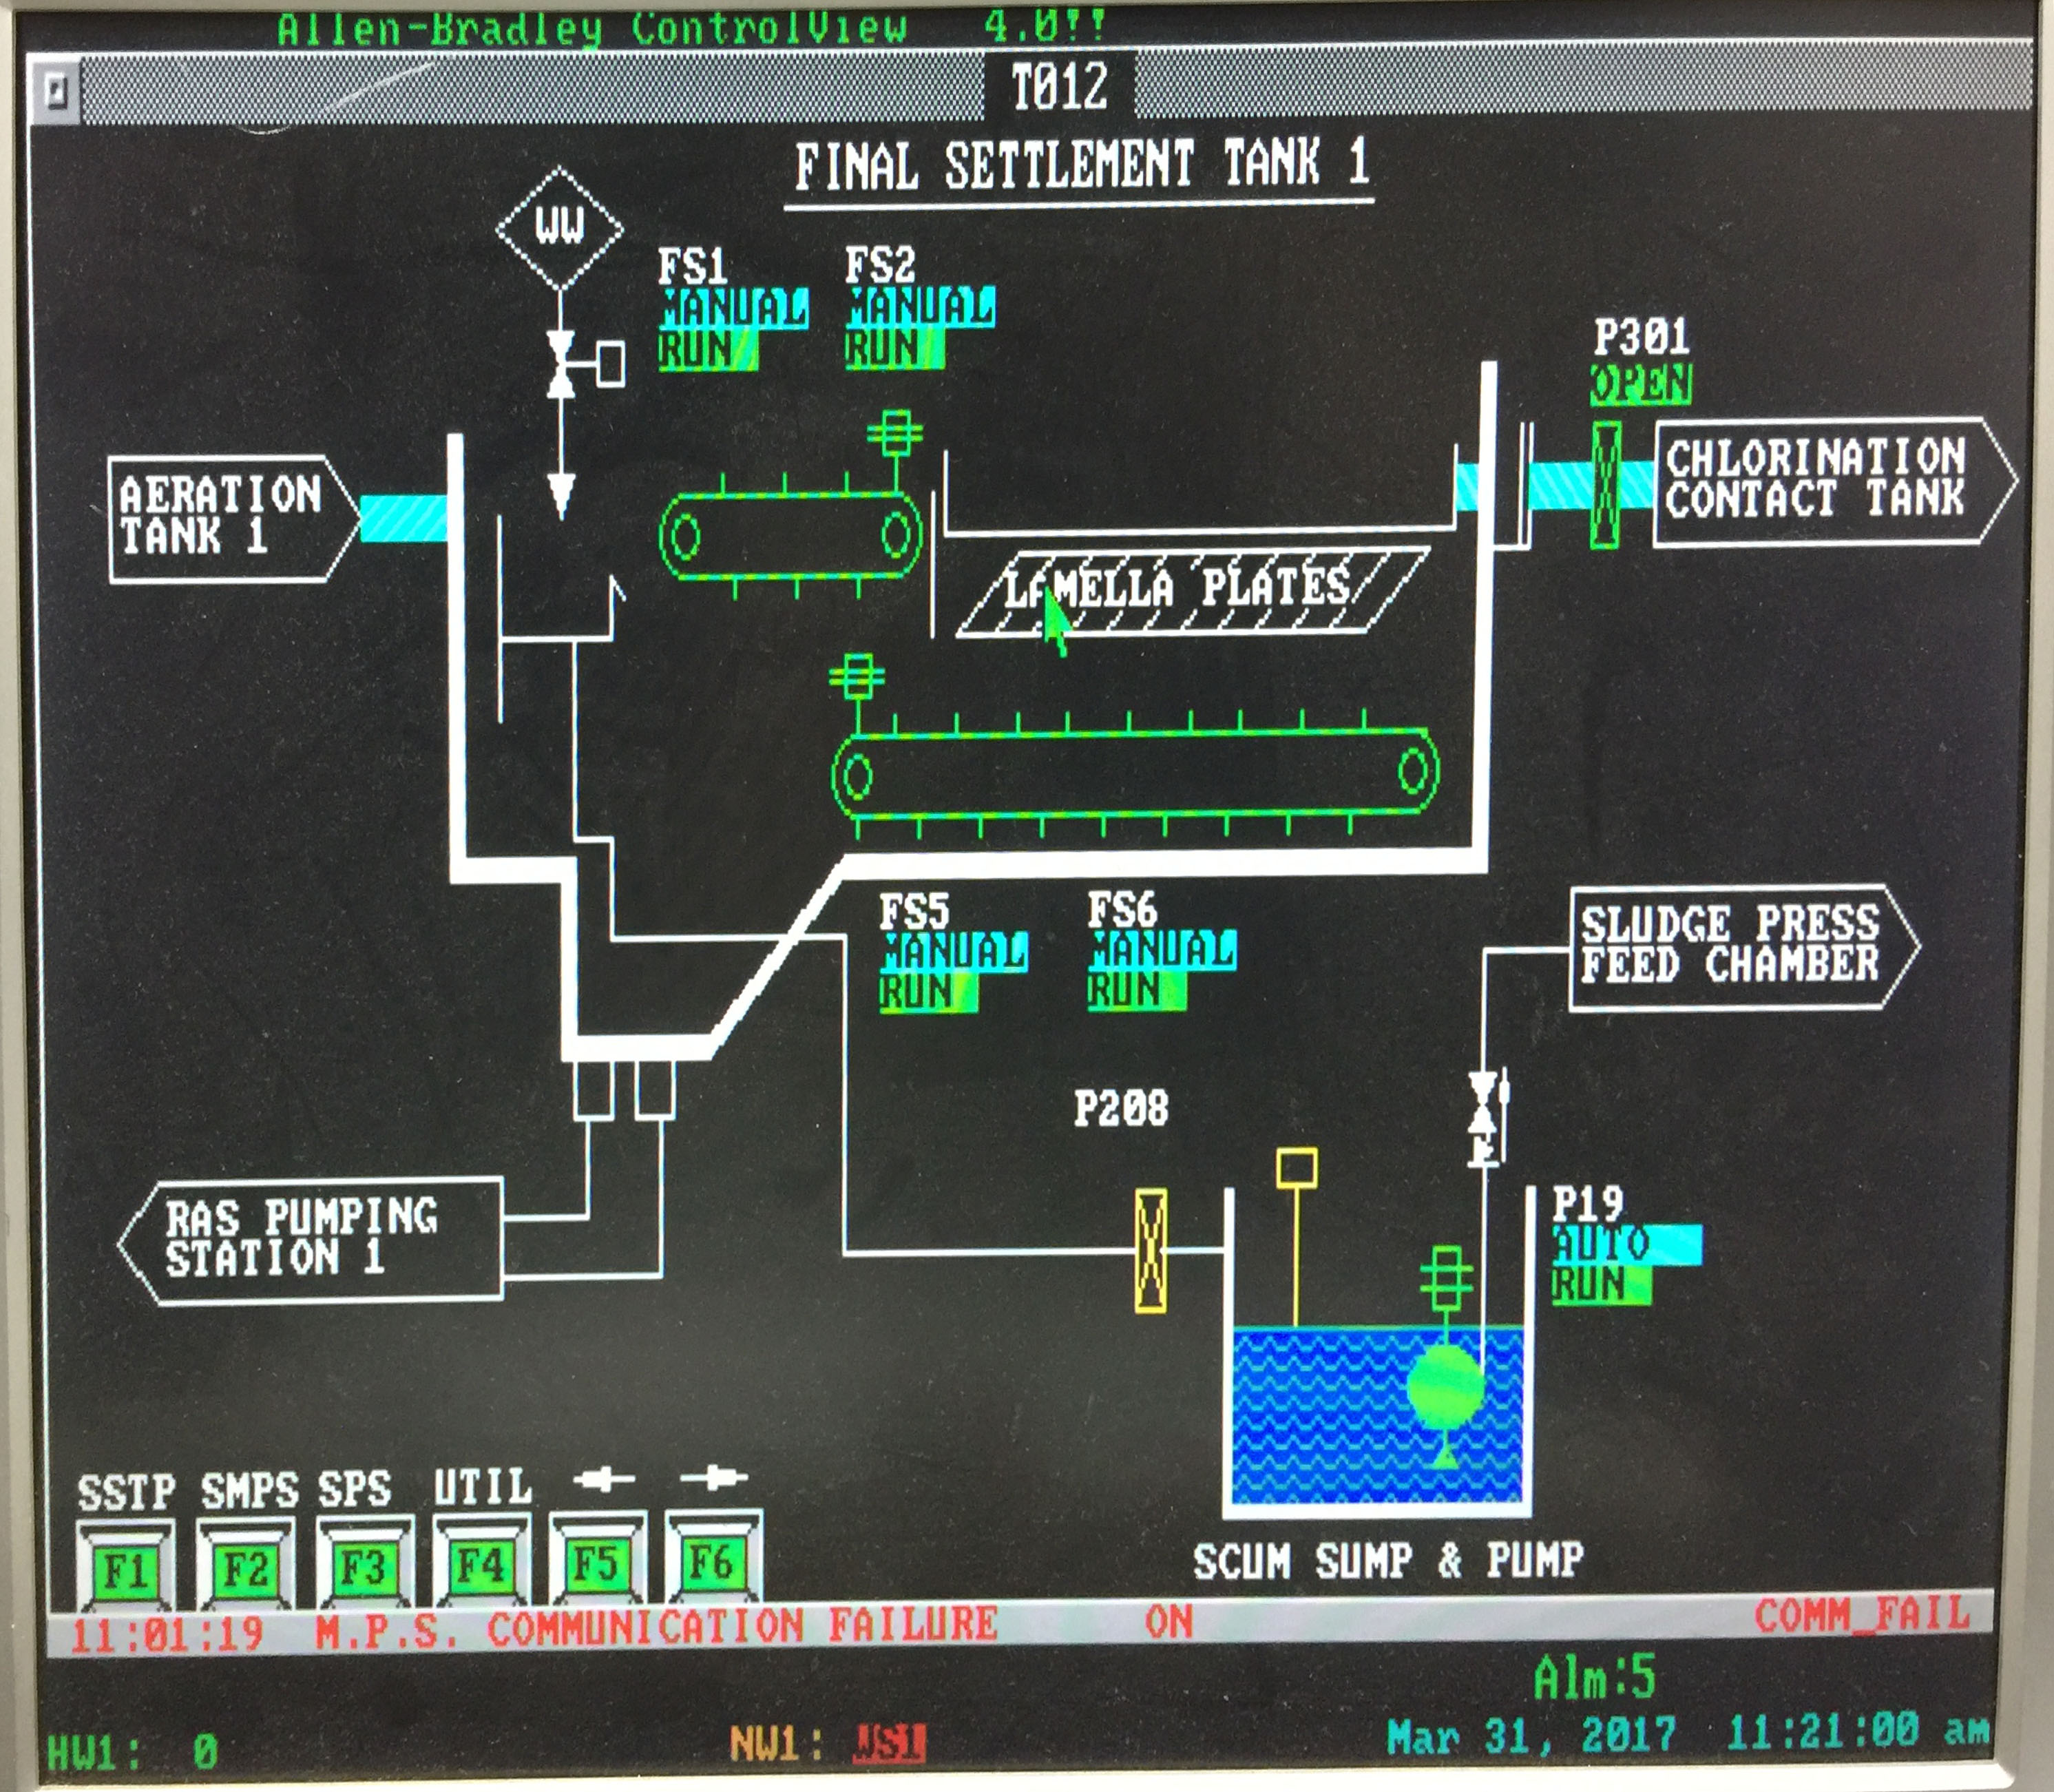 Part of Final Settlement Tank System screenshot from ControlView Before Works in DSD Stanley STW (Typical)